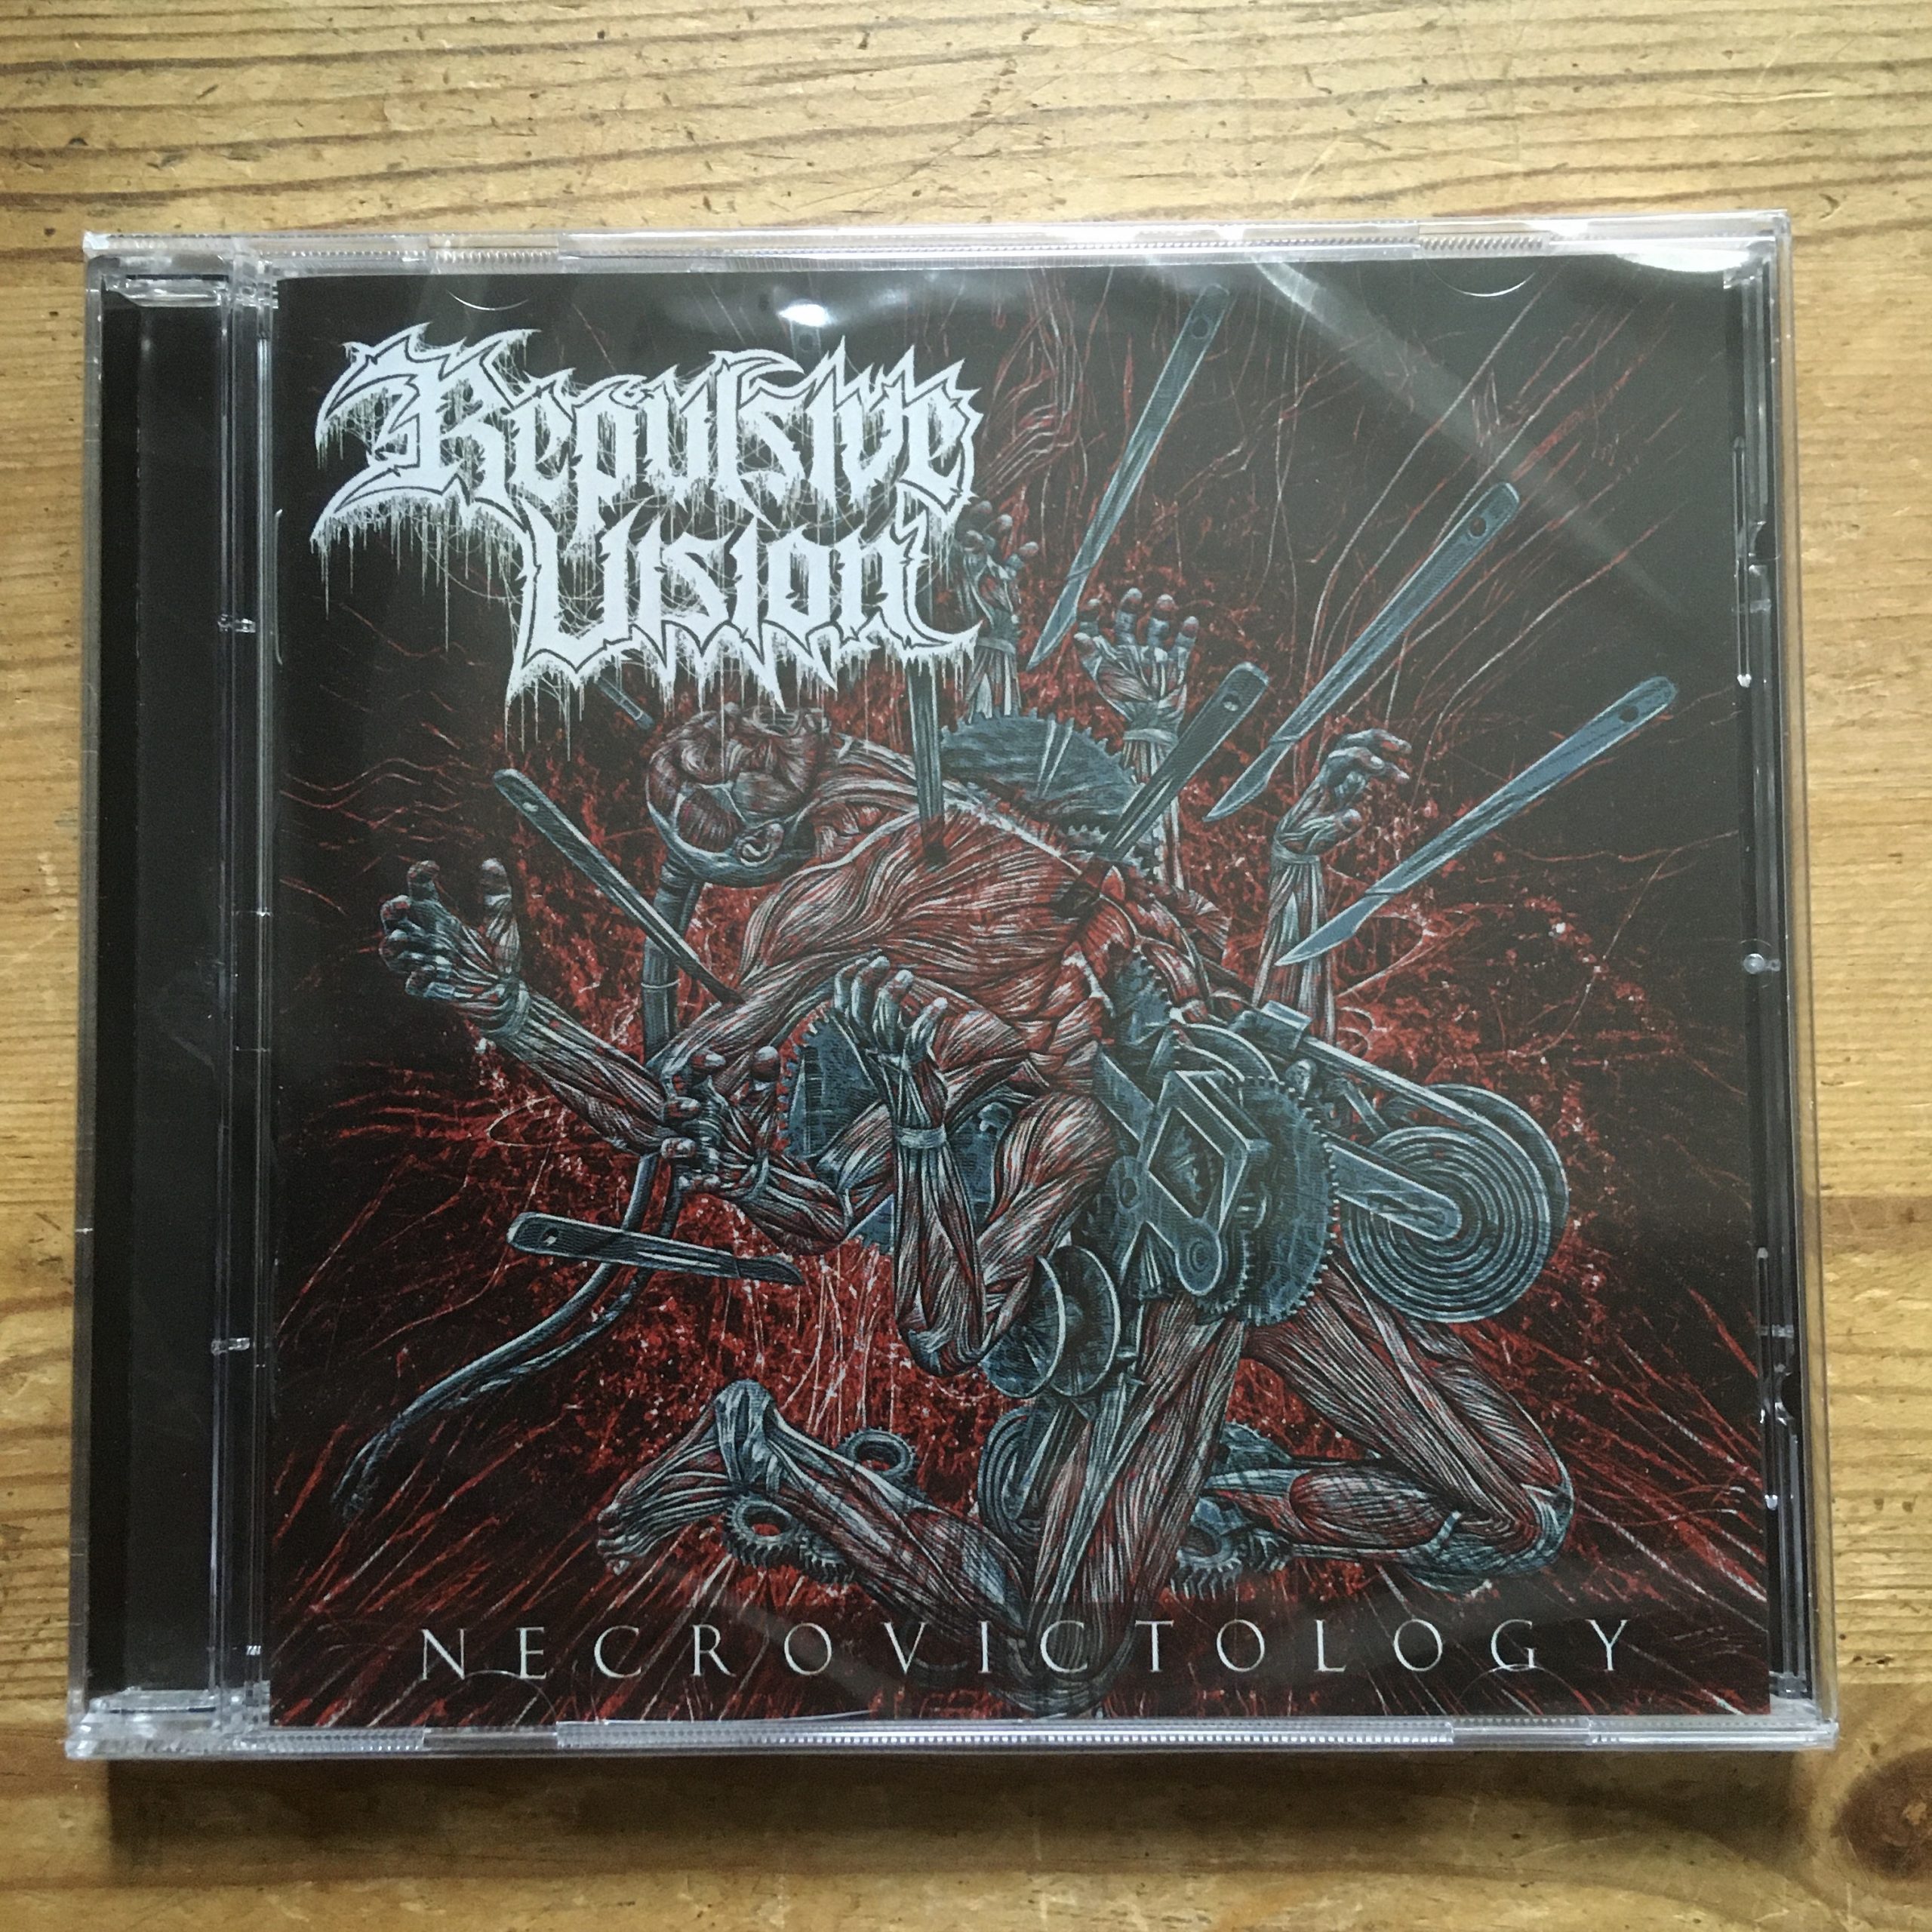 Photo of the Repulsive Vision - "Necrovictology" CD